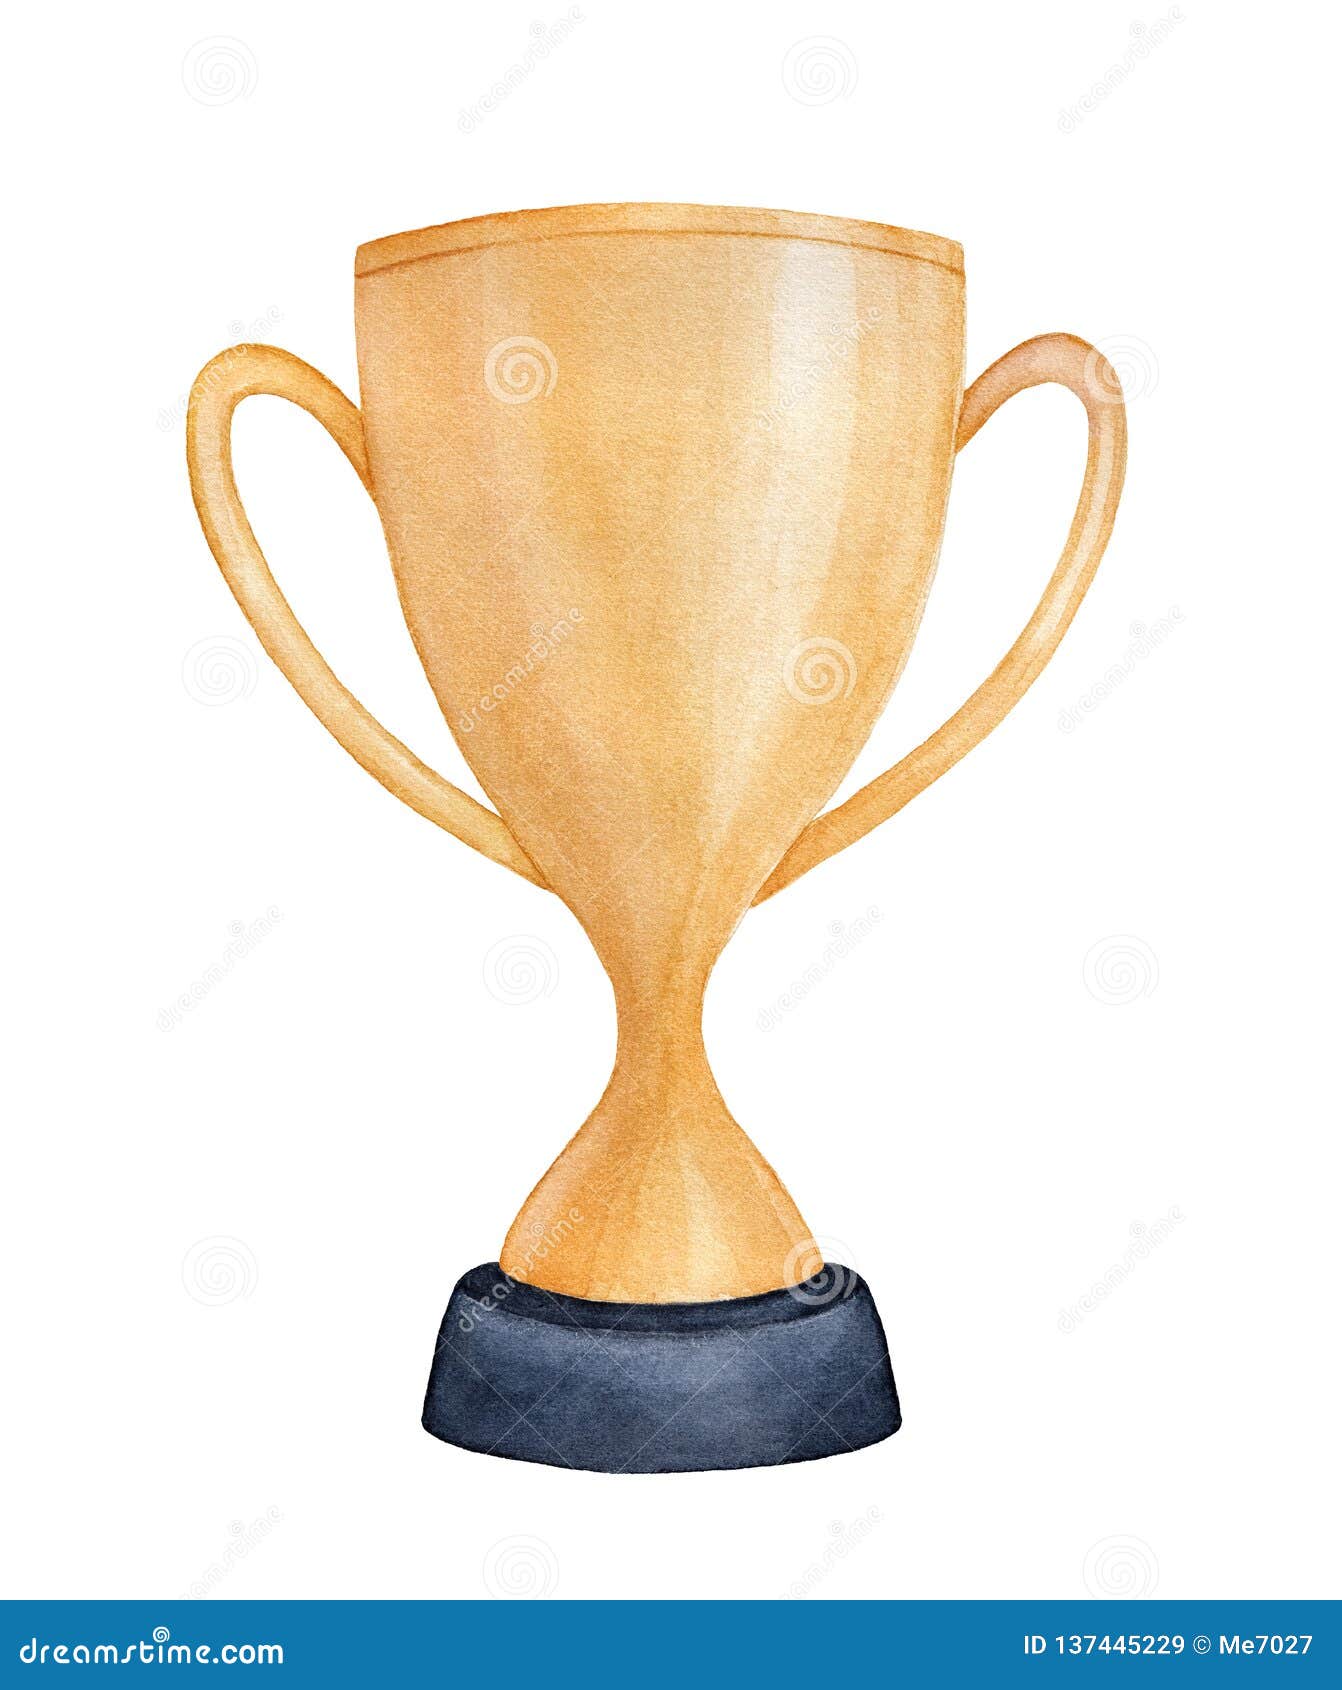 Champion Golden Trophy Cup Watercolour Sketch. Stock Illustration of celebrate, element: 137445229